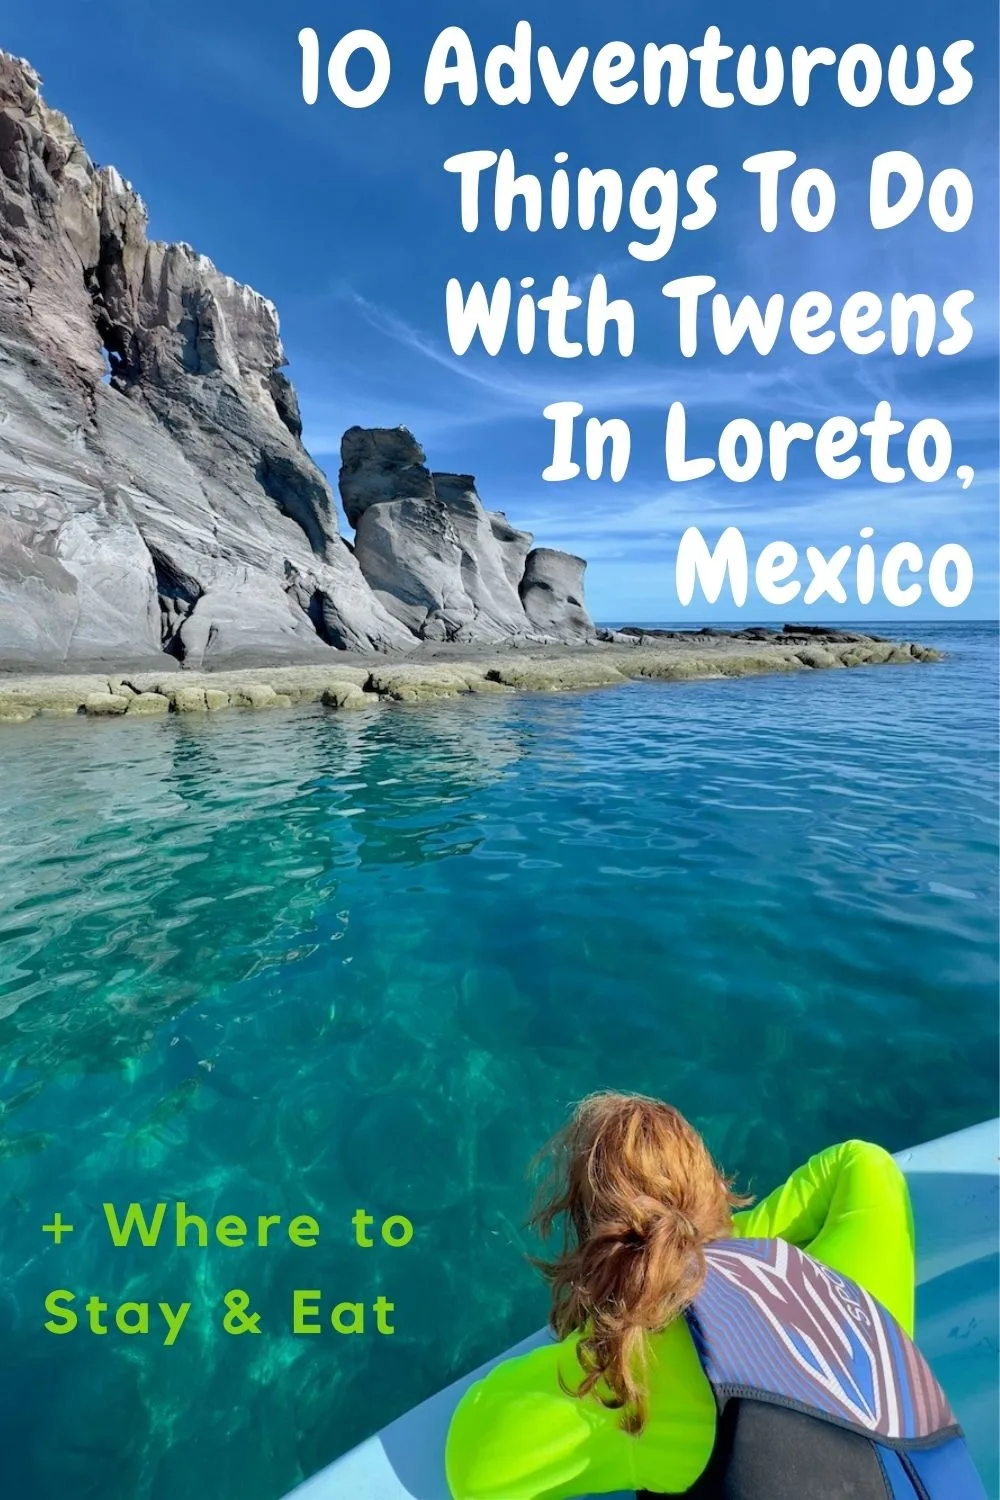 loreto, a seaside town in baja sur california, mexico offers unique cultura things do on land and cool adventures on the water, making it an ideal vacation spot with tweens and teens. 